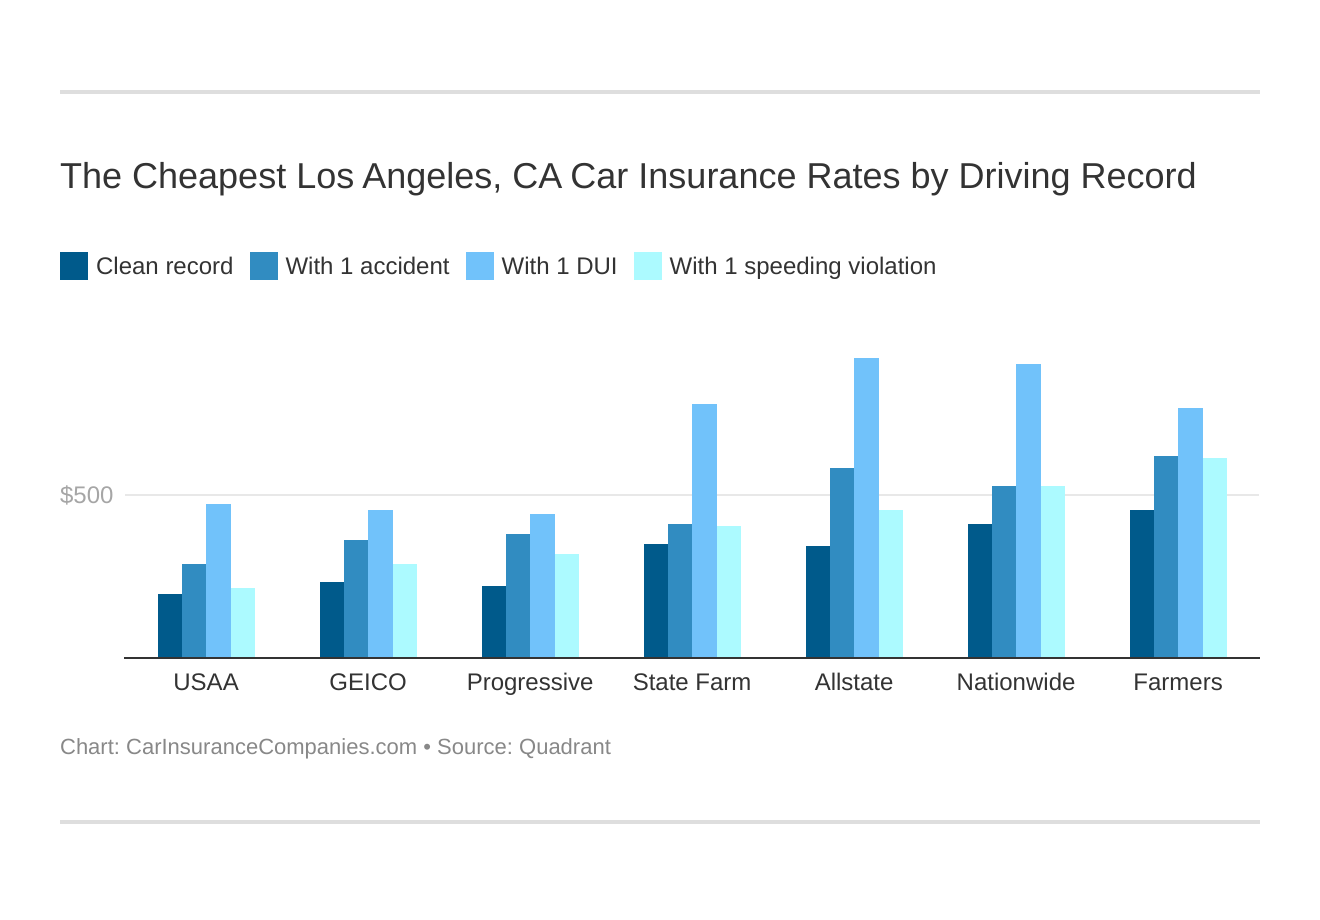 The Cheapest Los Angeles, CA Car Insurance Rates by Driving Record